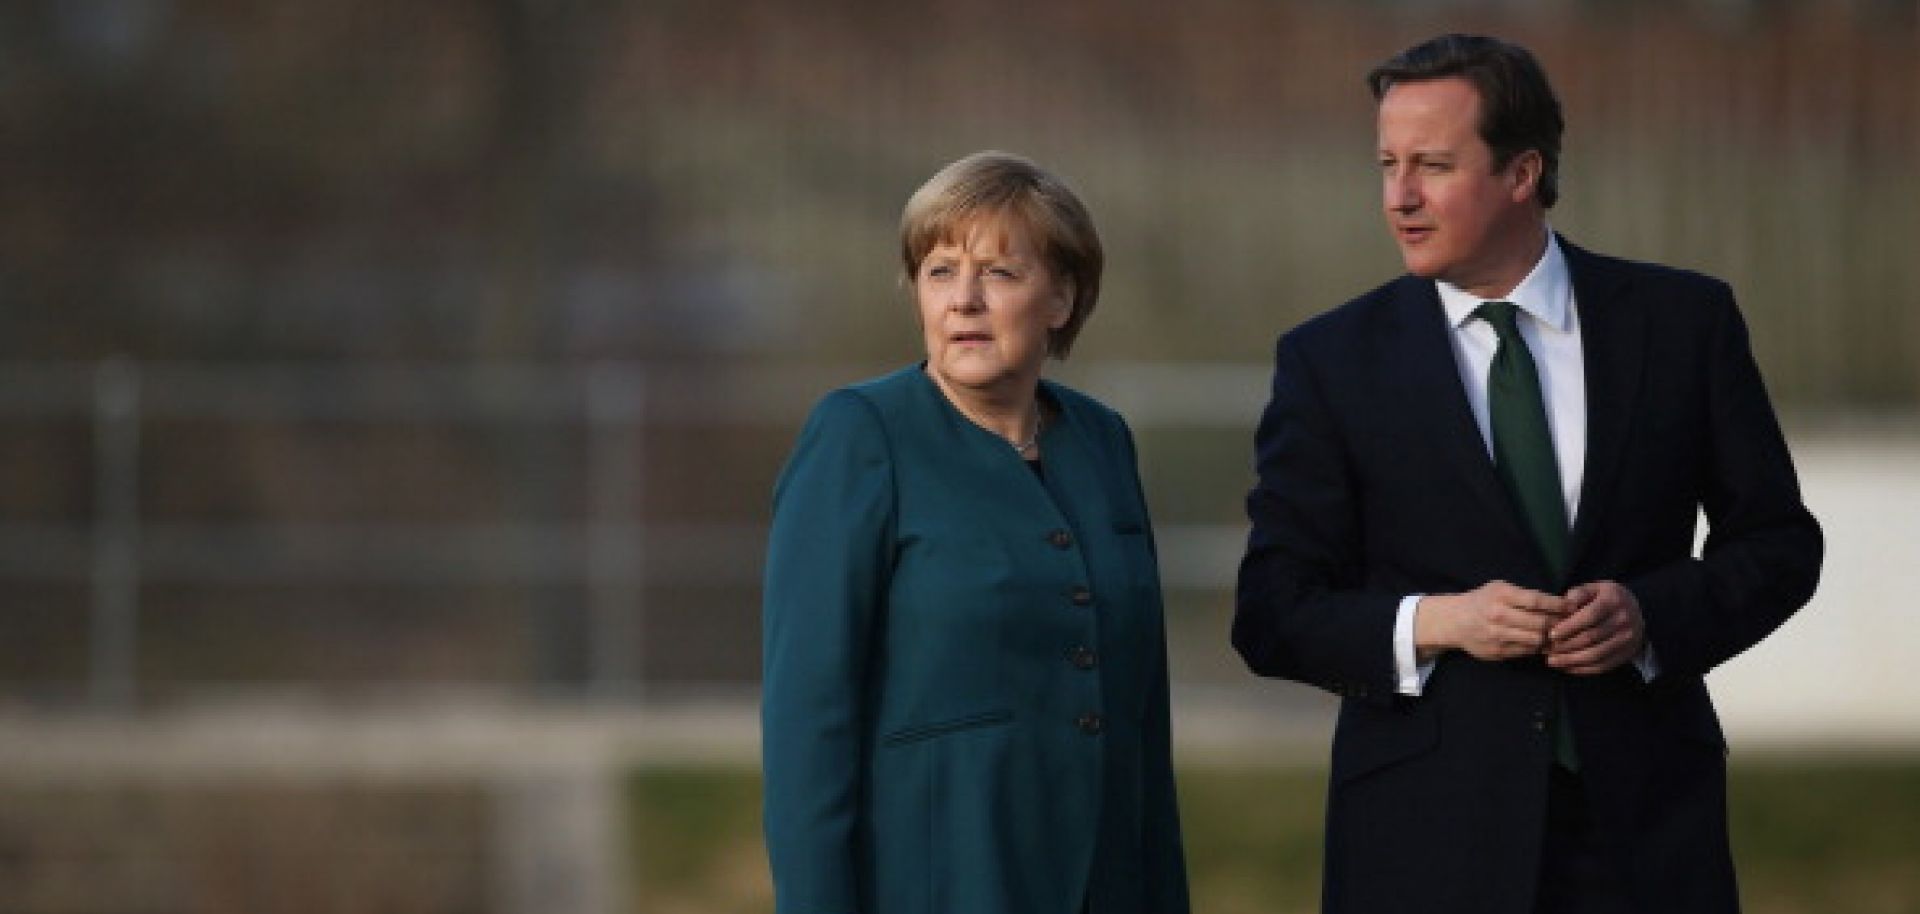 Germany and the United Kingdom's Opposing Views on the EU